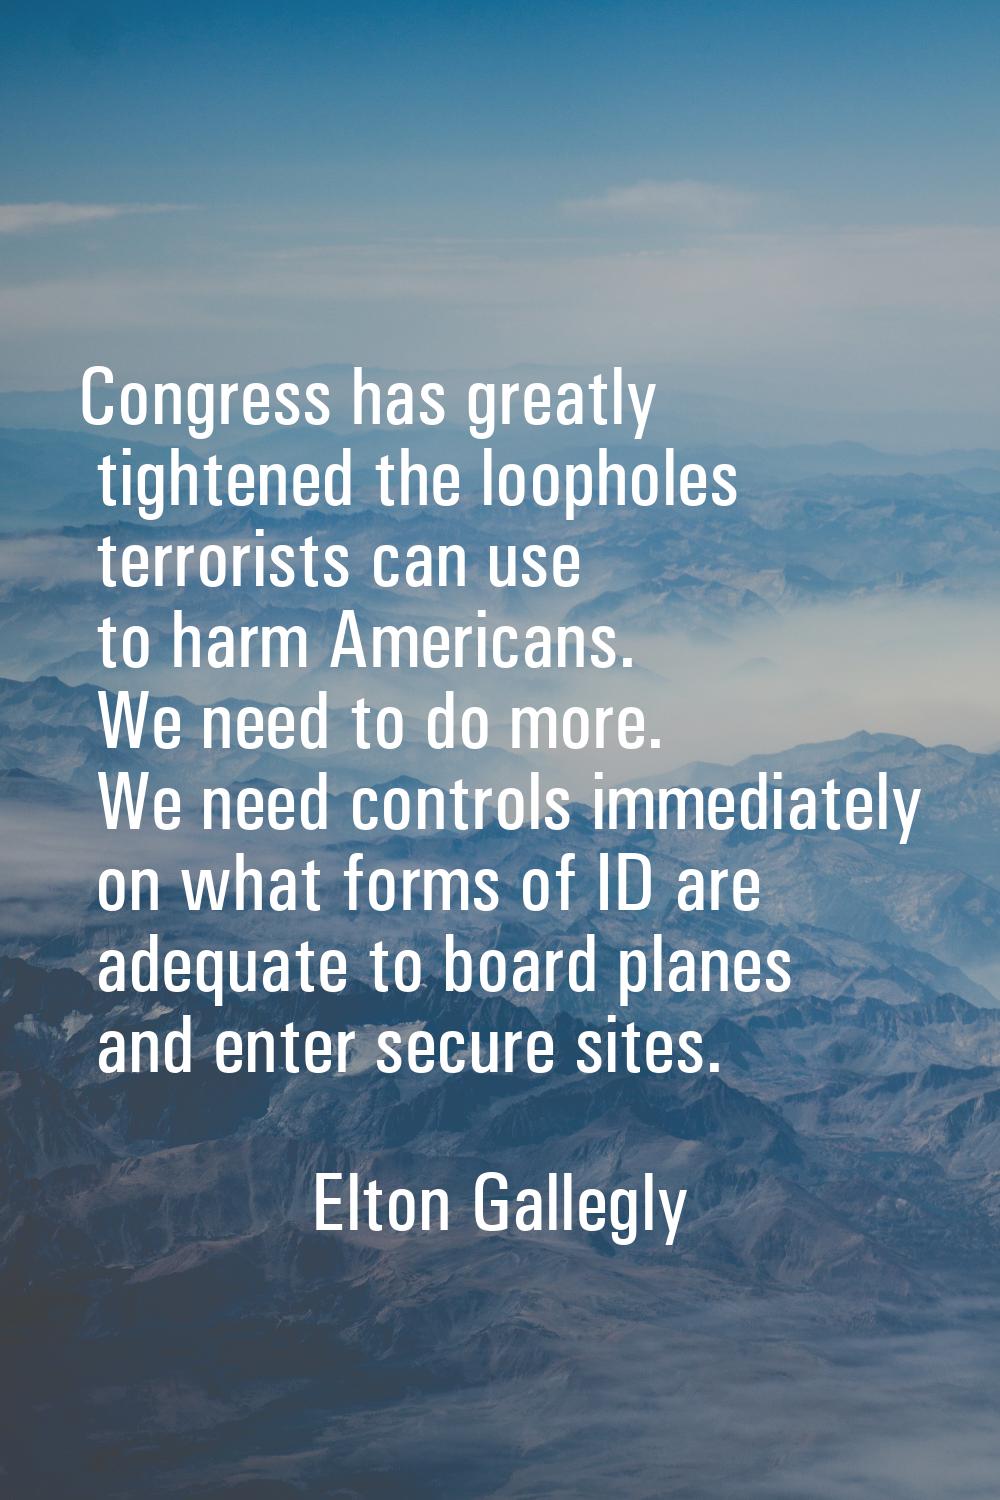 Congress has greatly tightened the loopholes terrorists can use to harm Americans. We need to do mo